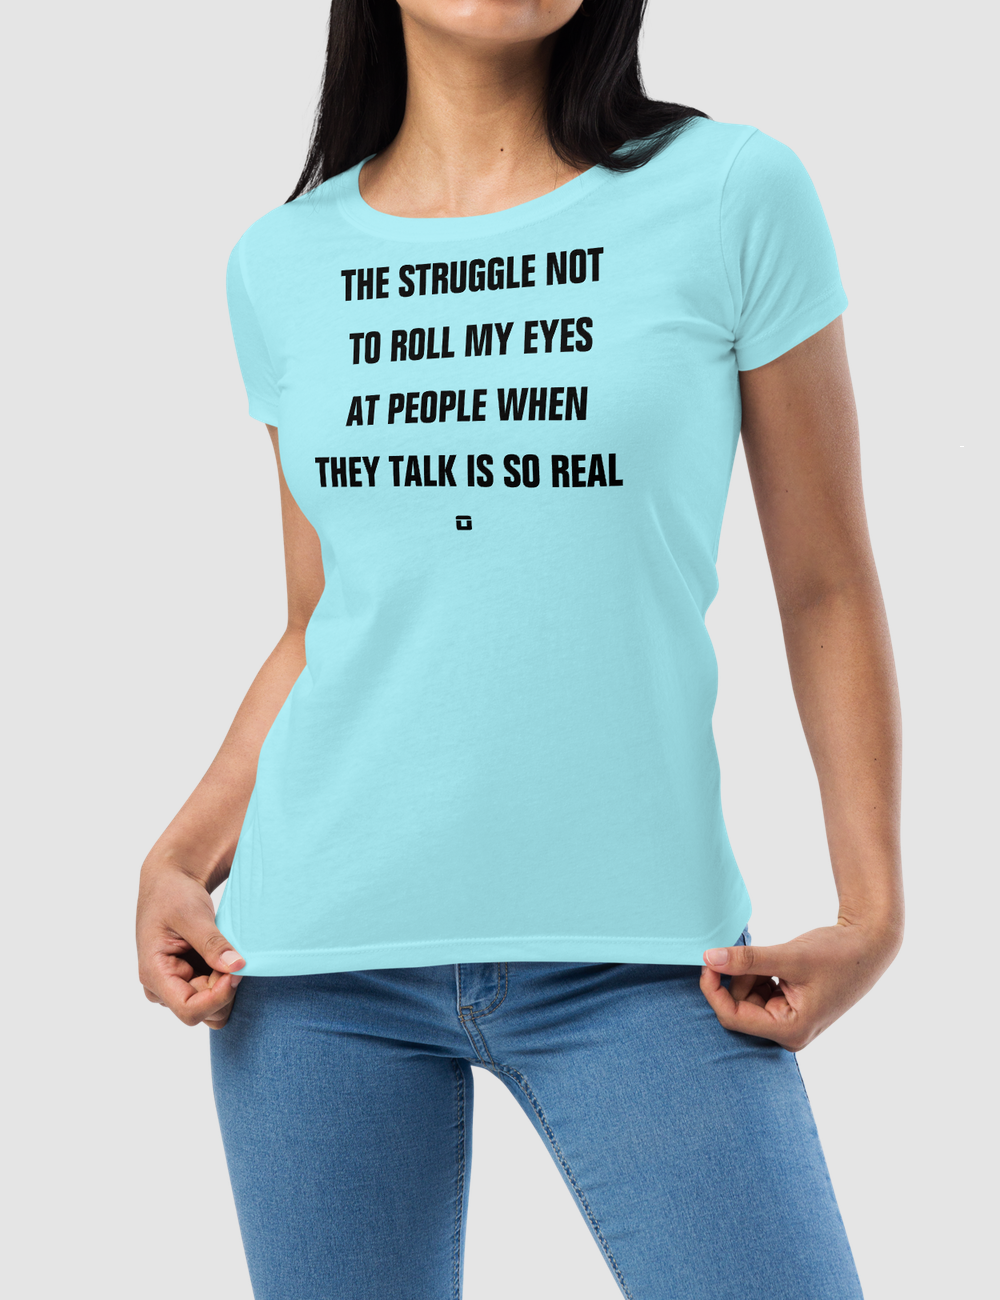 The Struggle Not To Roll My Eyes | Women's Fitted T-Shirt OniTakai